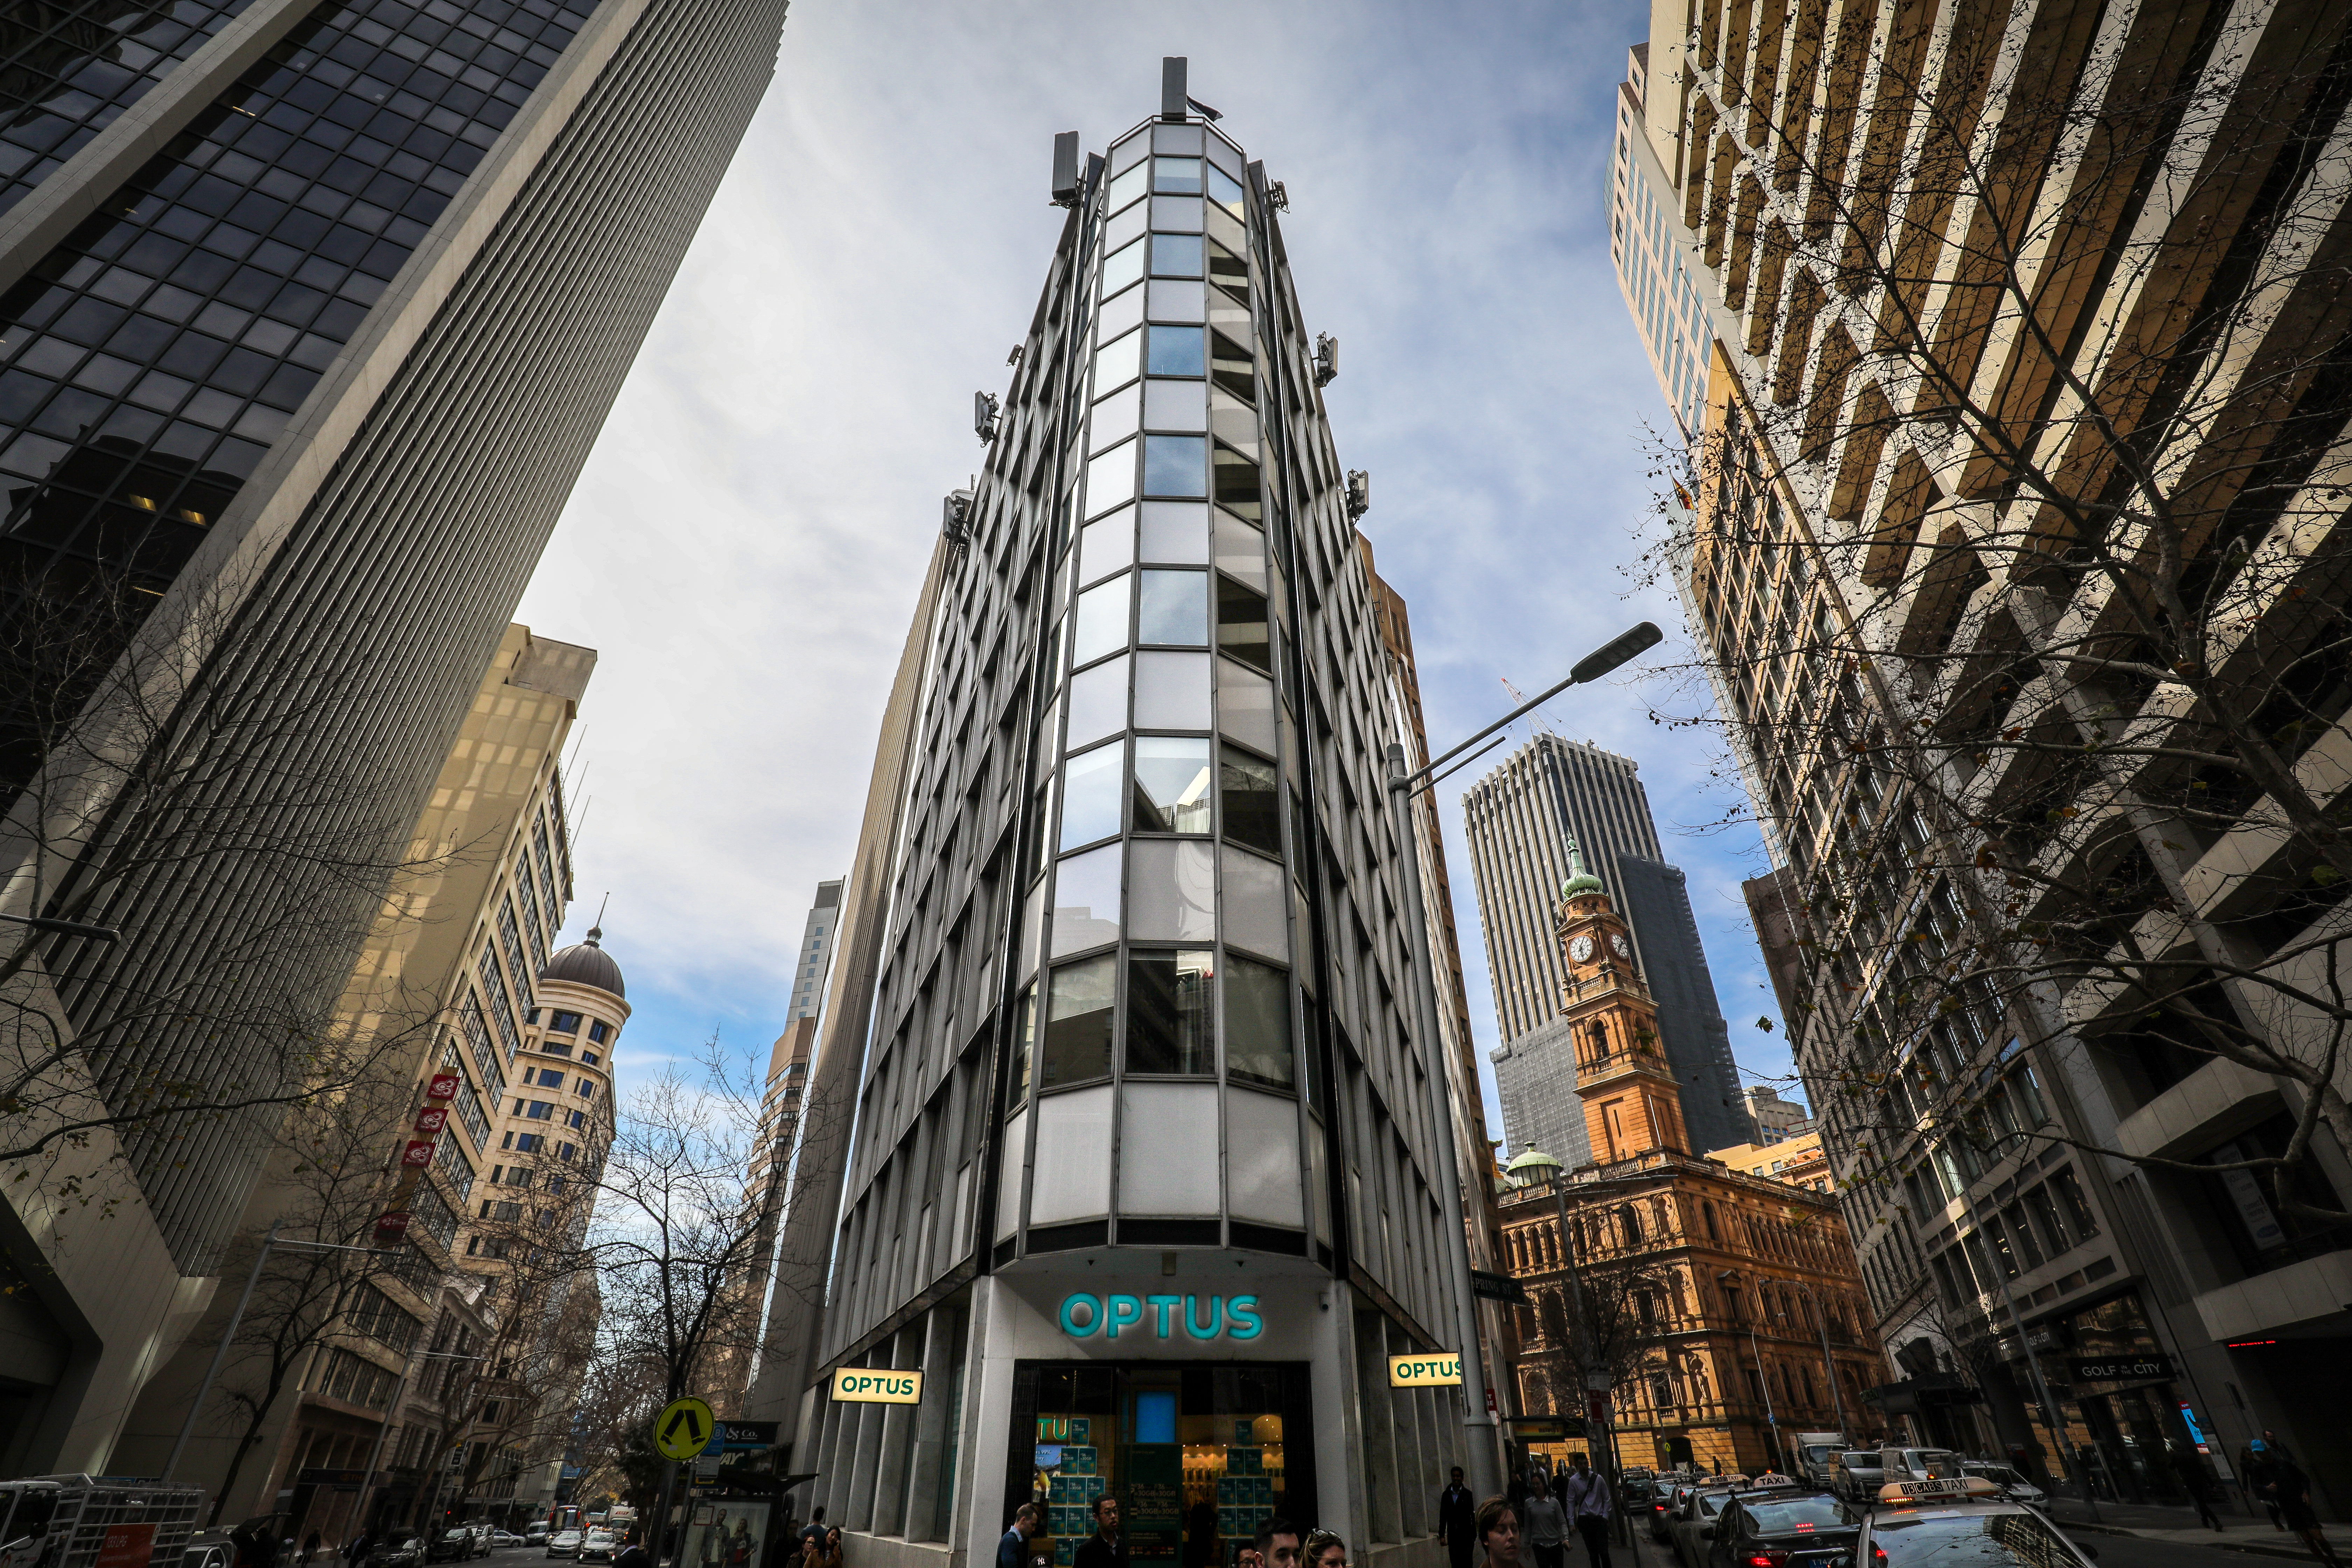 Located at 62 Pitt Street, this building is an example of late 20th century internationalist style by firm Spain, Cosh &amp; Stewart. Opened in 1962.